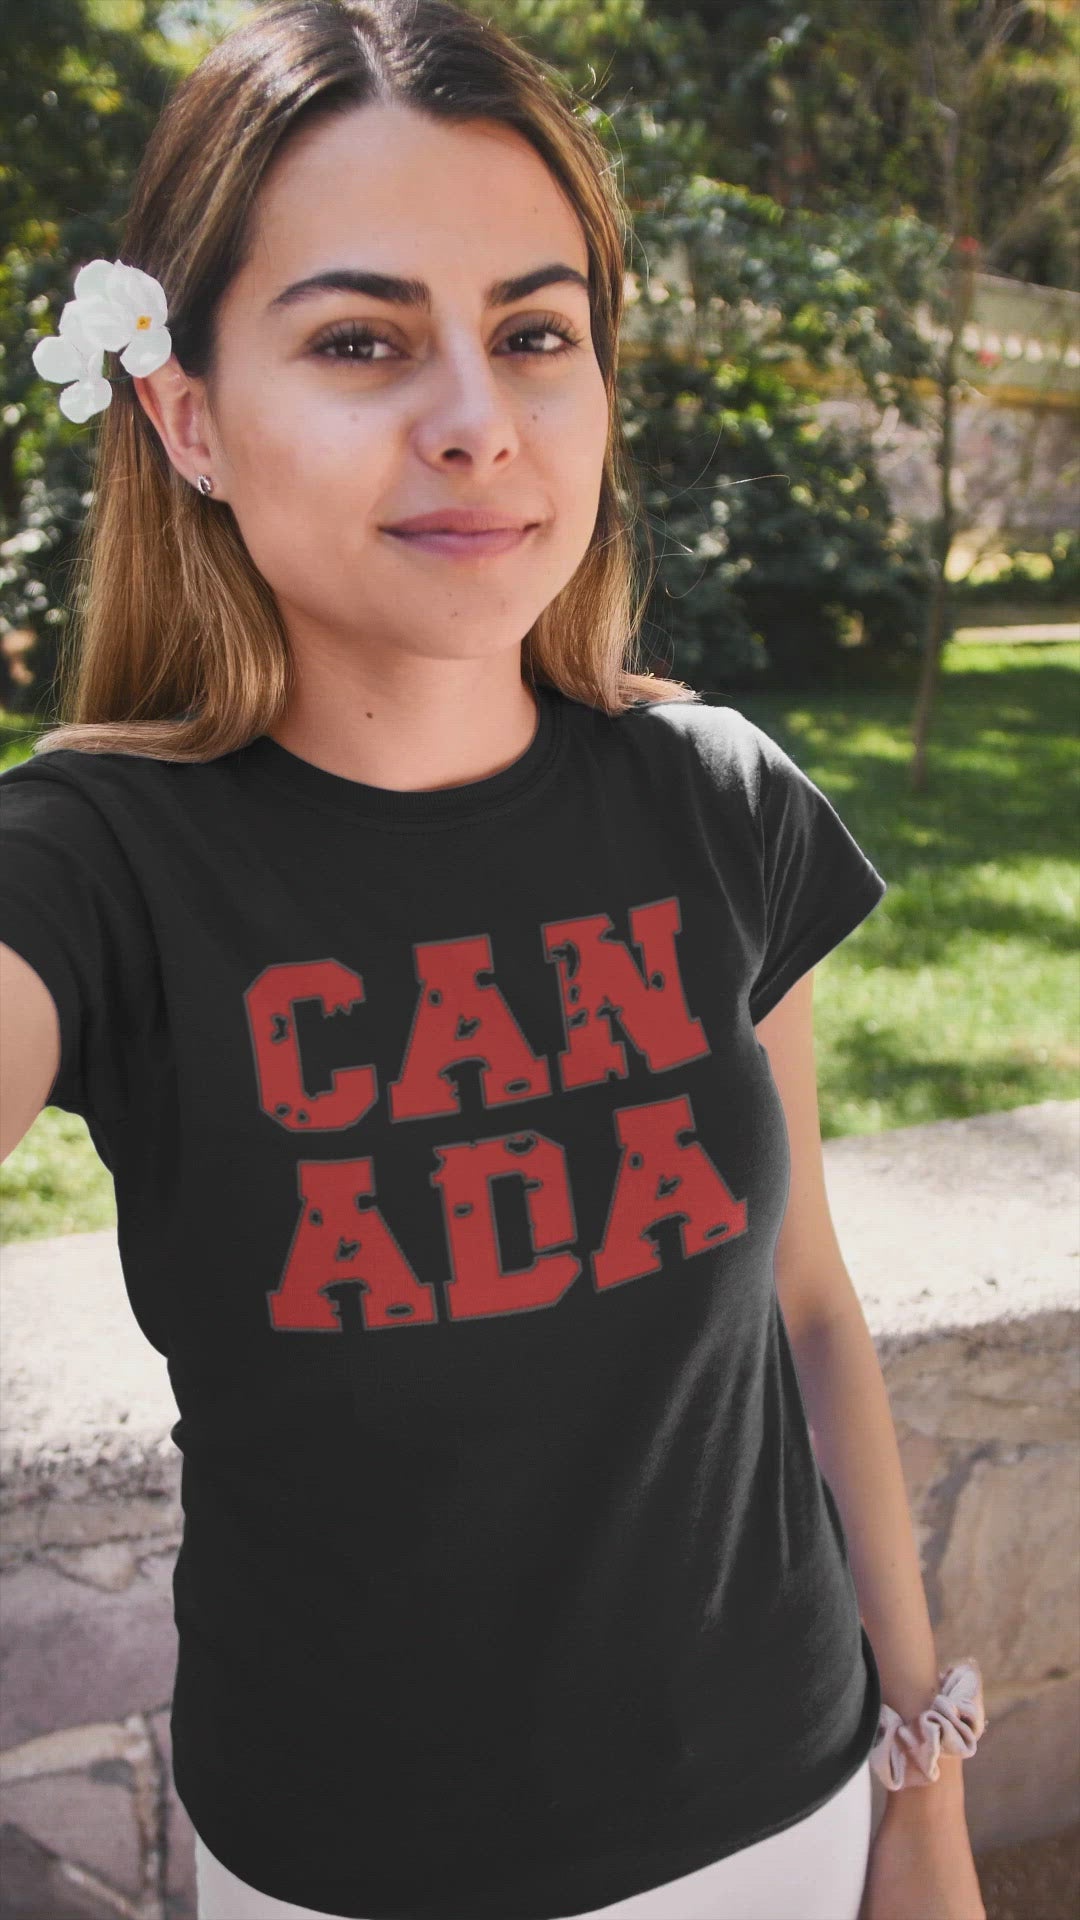 the trendy t-shirt with distressed Canada on it - Purple LadyBug Decor